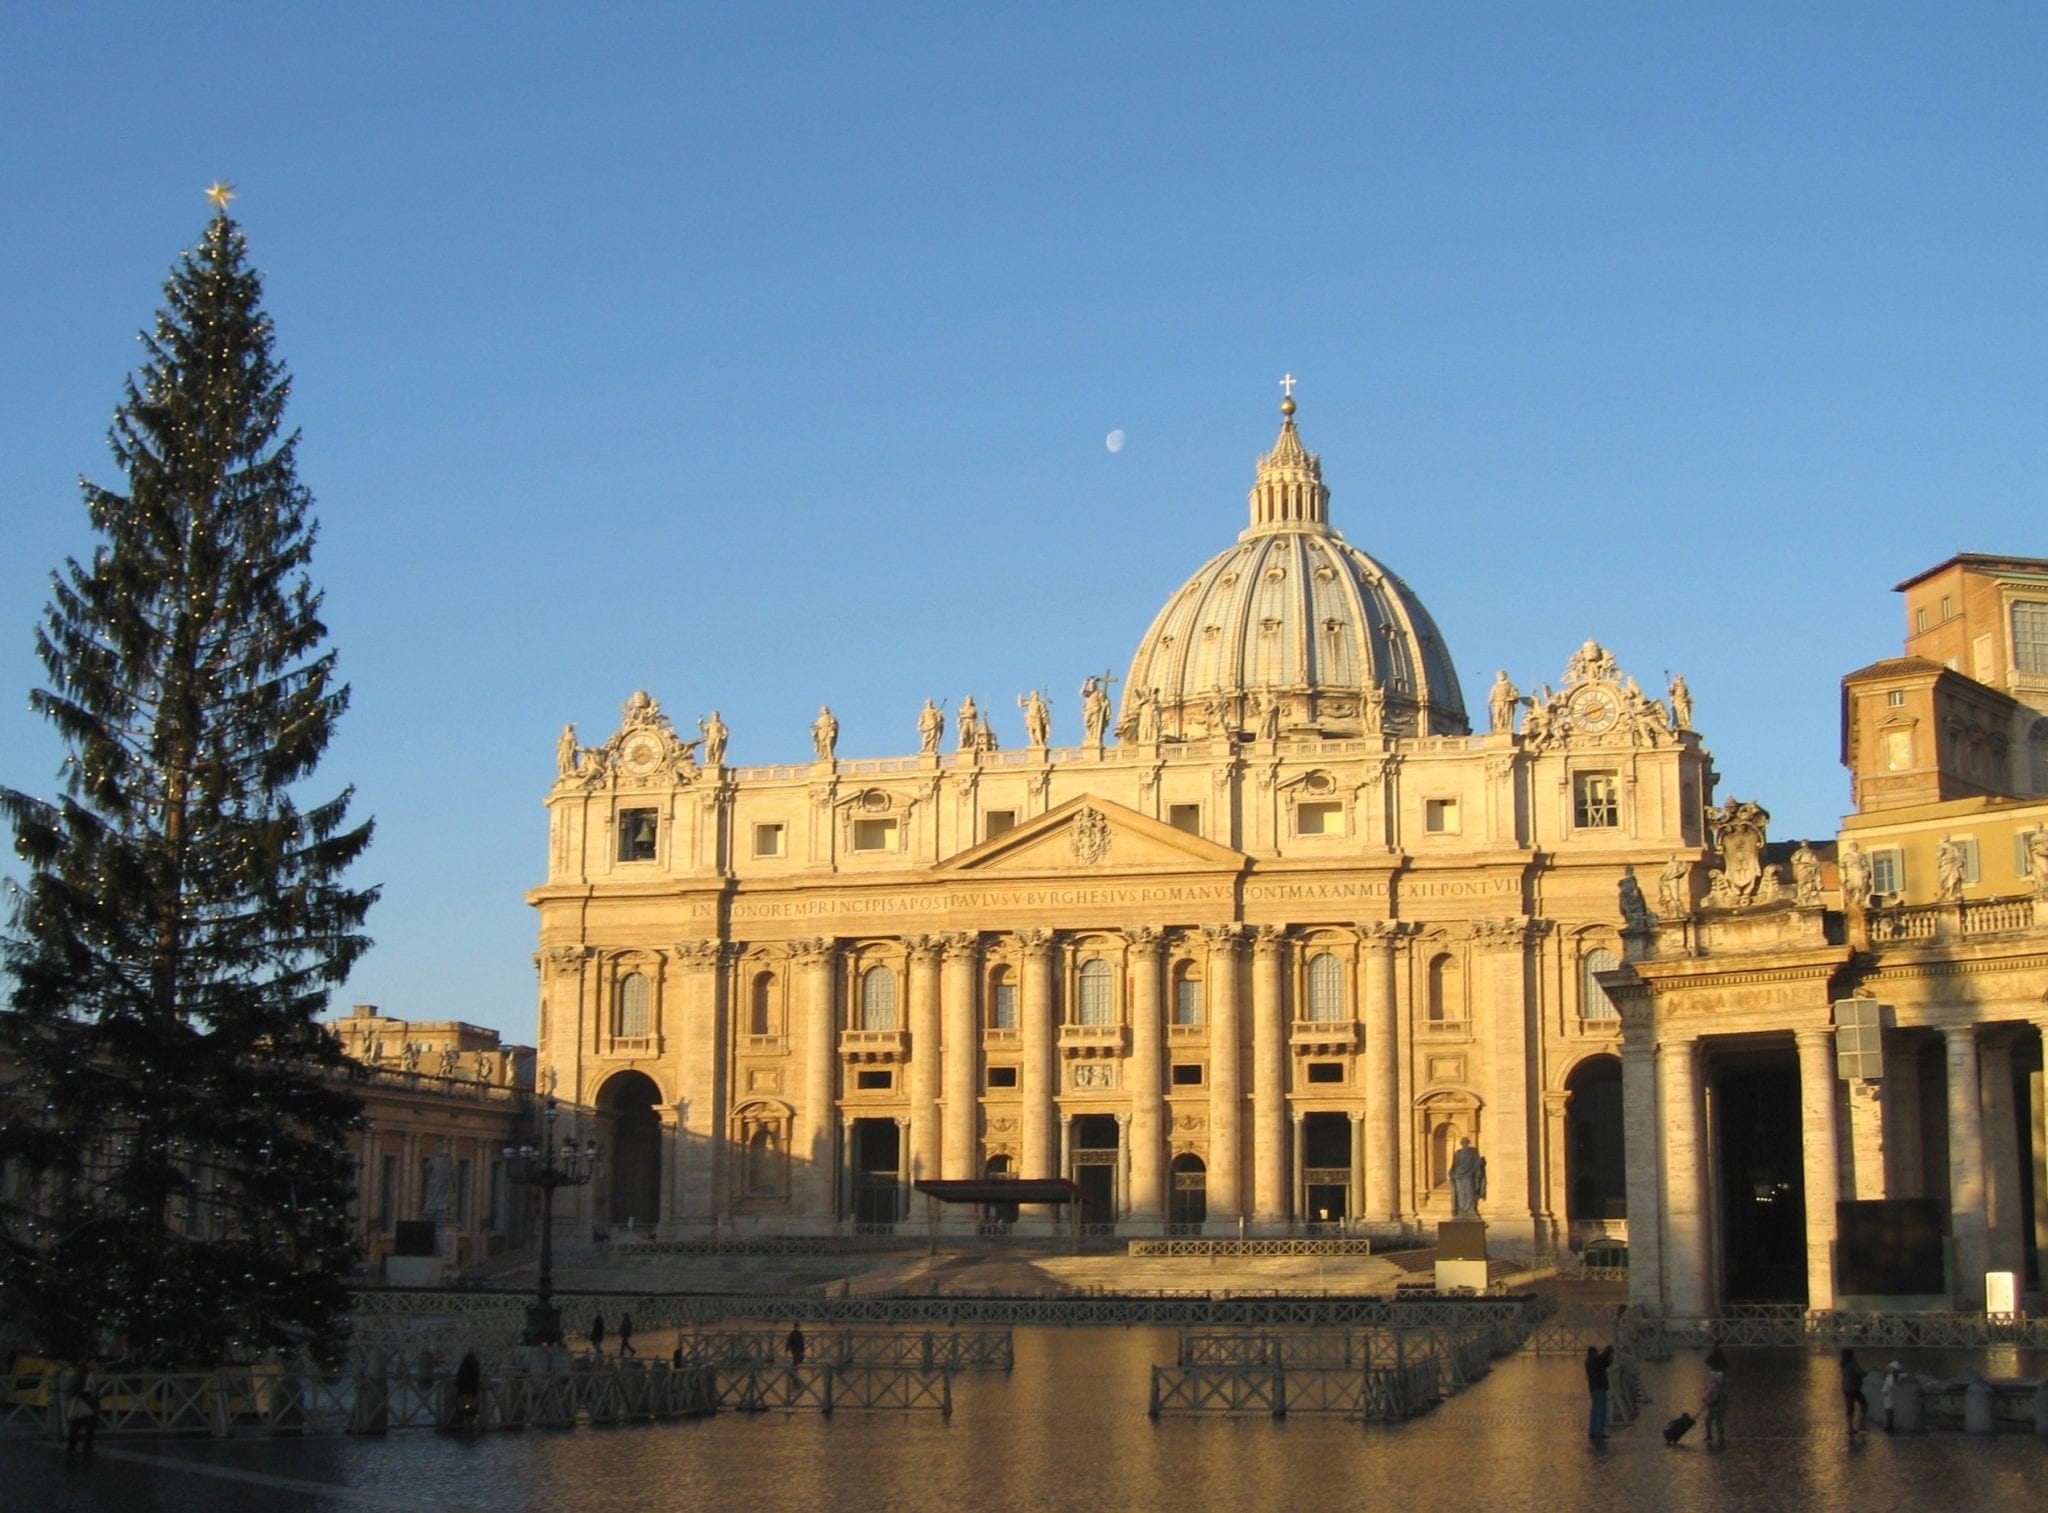 Visiting St. Peter's Basilica: Insider's Guide to Rome's Most Famous Church